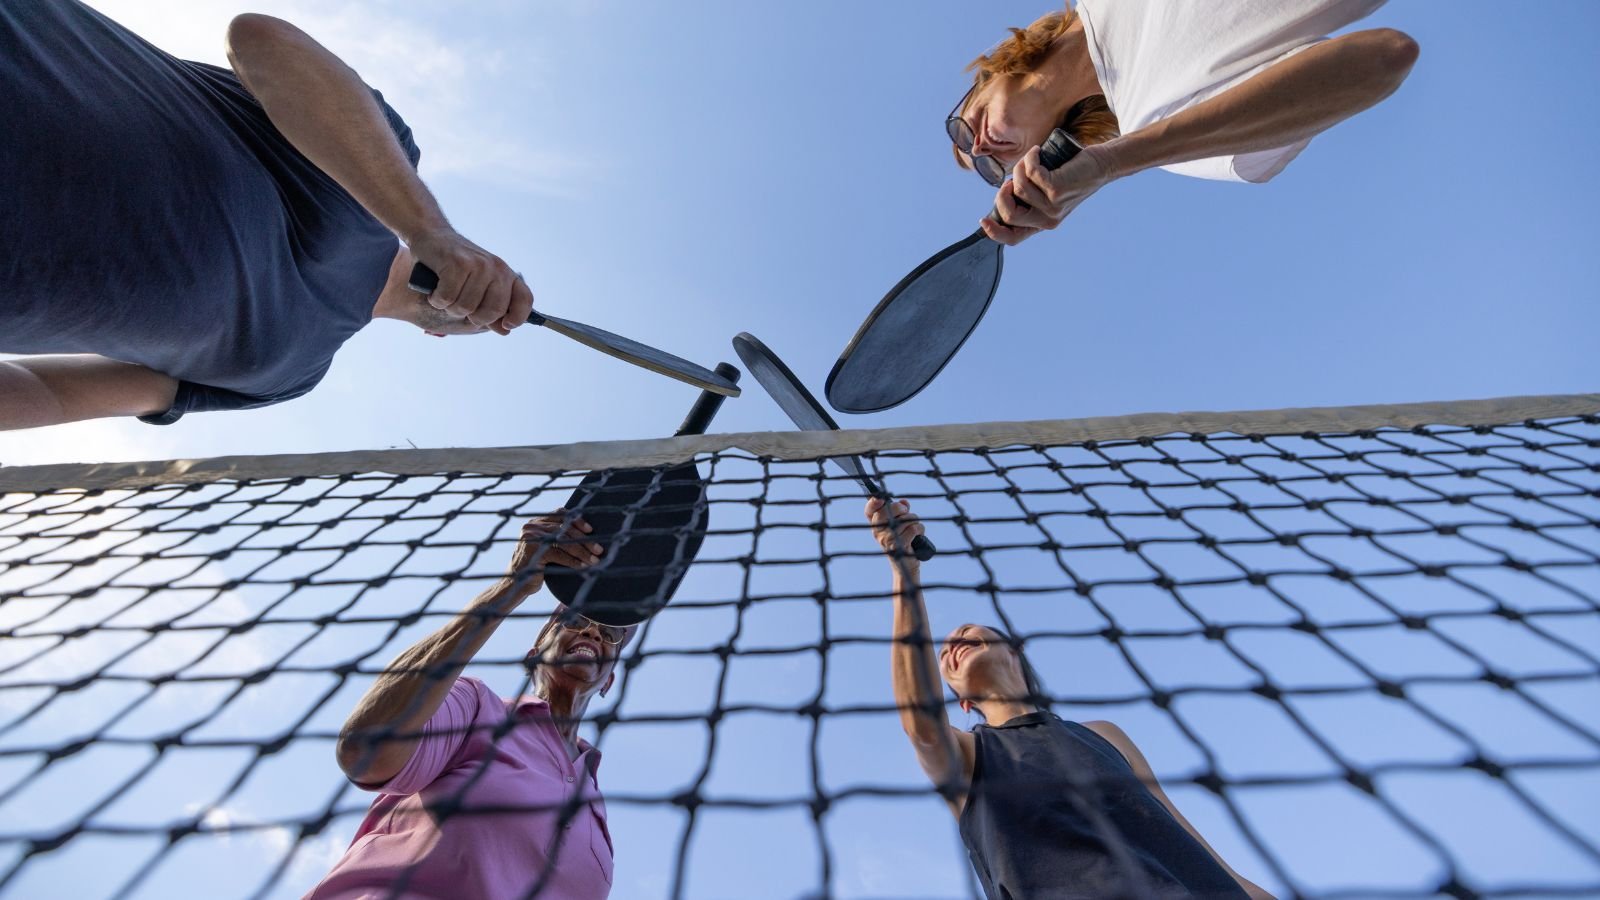 Promotes Social Interaction and Community Engagement - Health Benefits of Playing Pickleball